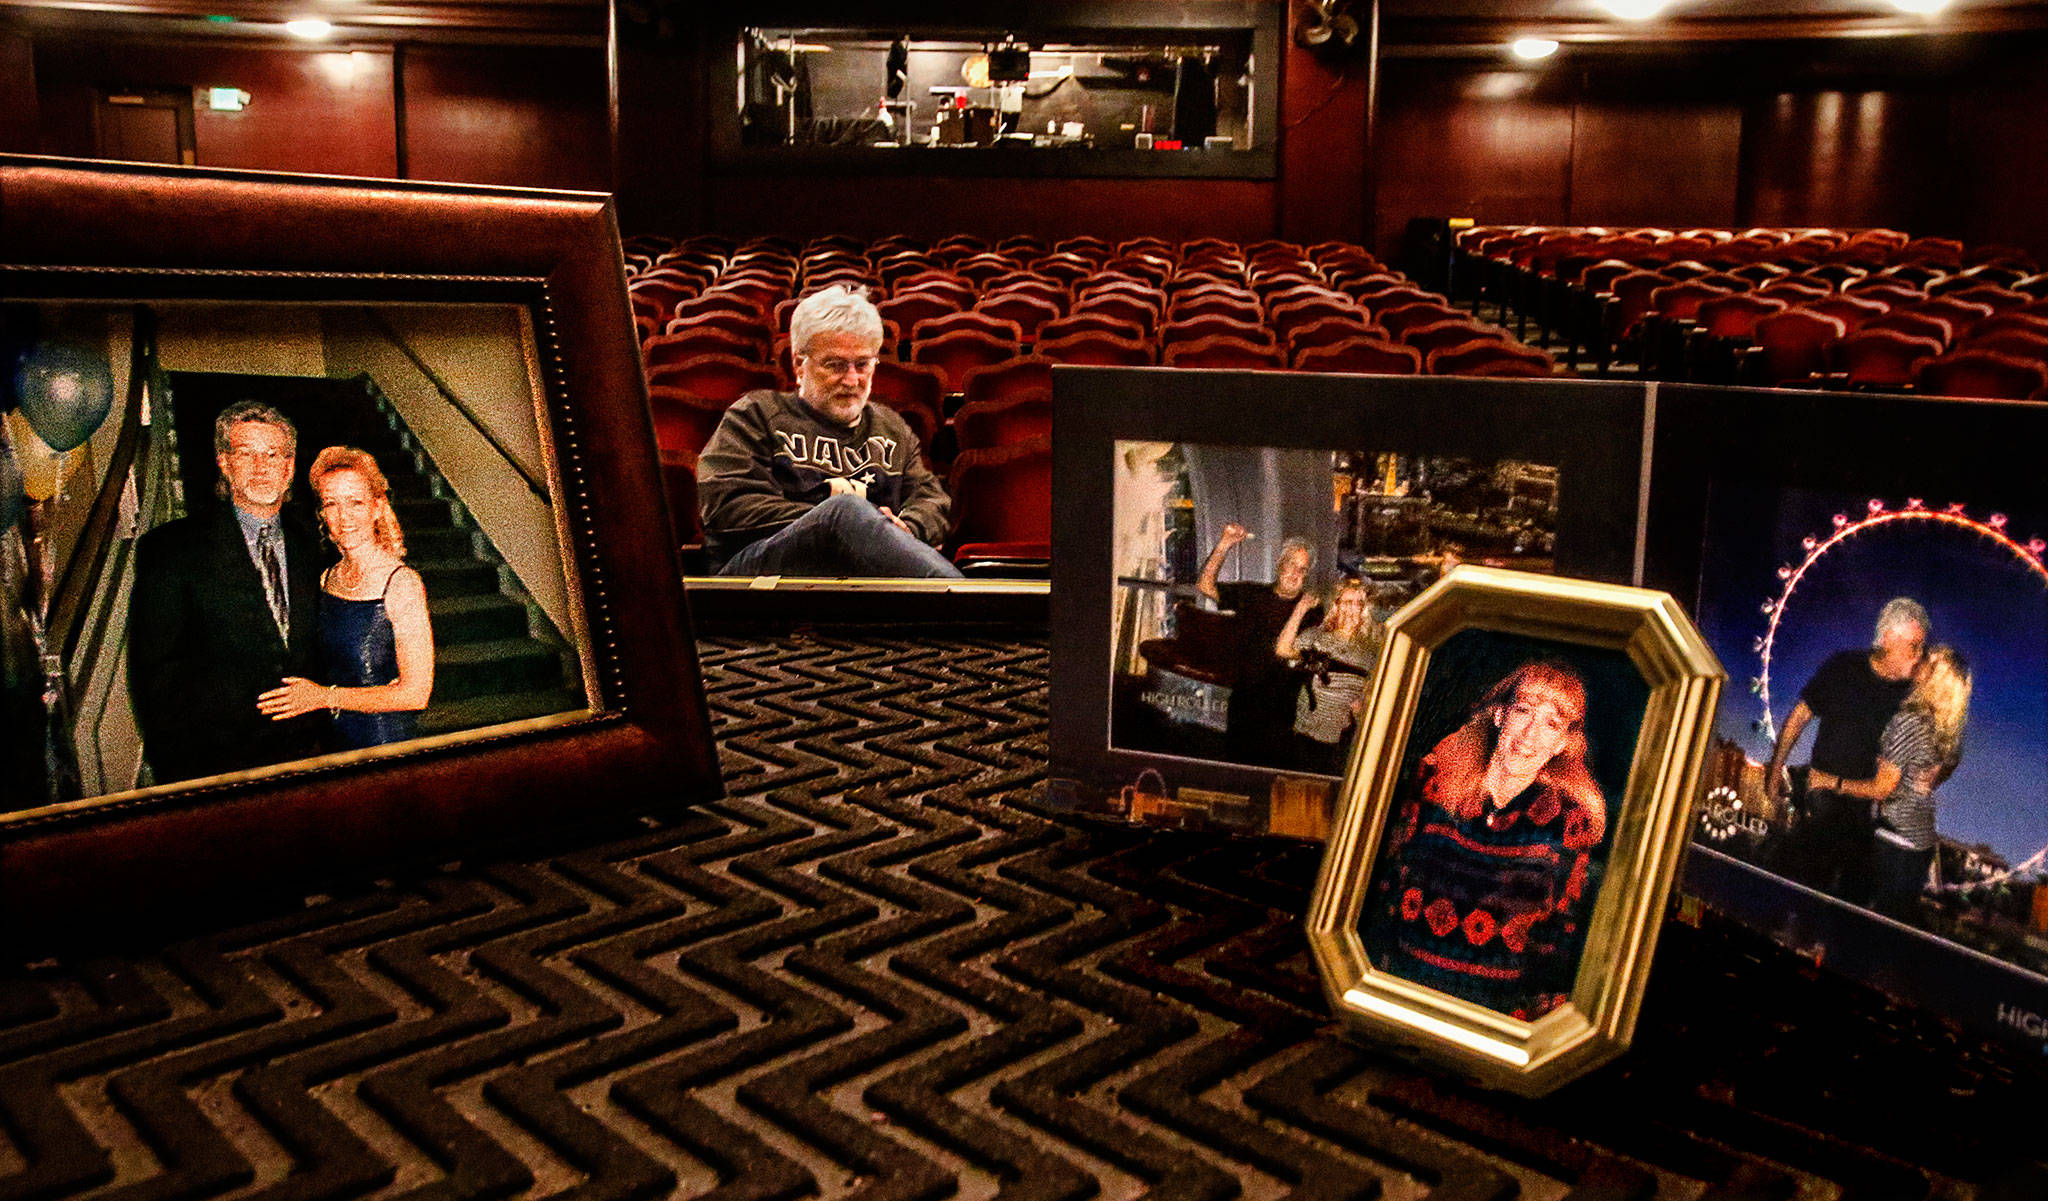 Curt Shriner sits near the stage in the Historic Everett Theatre that his wife Laura loved. The theater’s box office manager and an actress, Laura Shriner died while in Las Vegas last Thursday with her husband. Curt is the theater manager. Some of his favorite pictures of her are near the front of the stage where she stood so many times. (Dan Bates / The Herald)